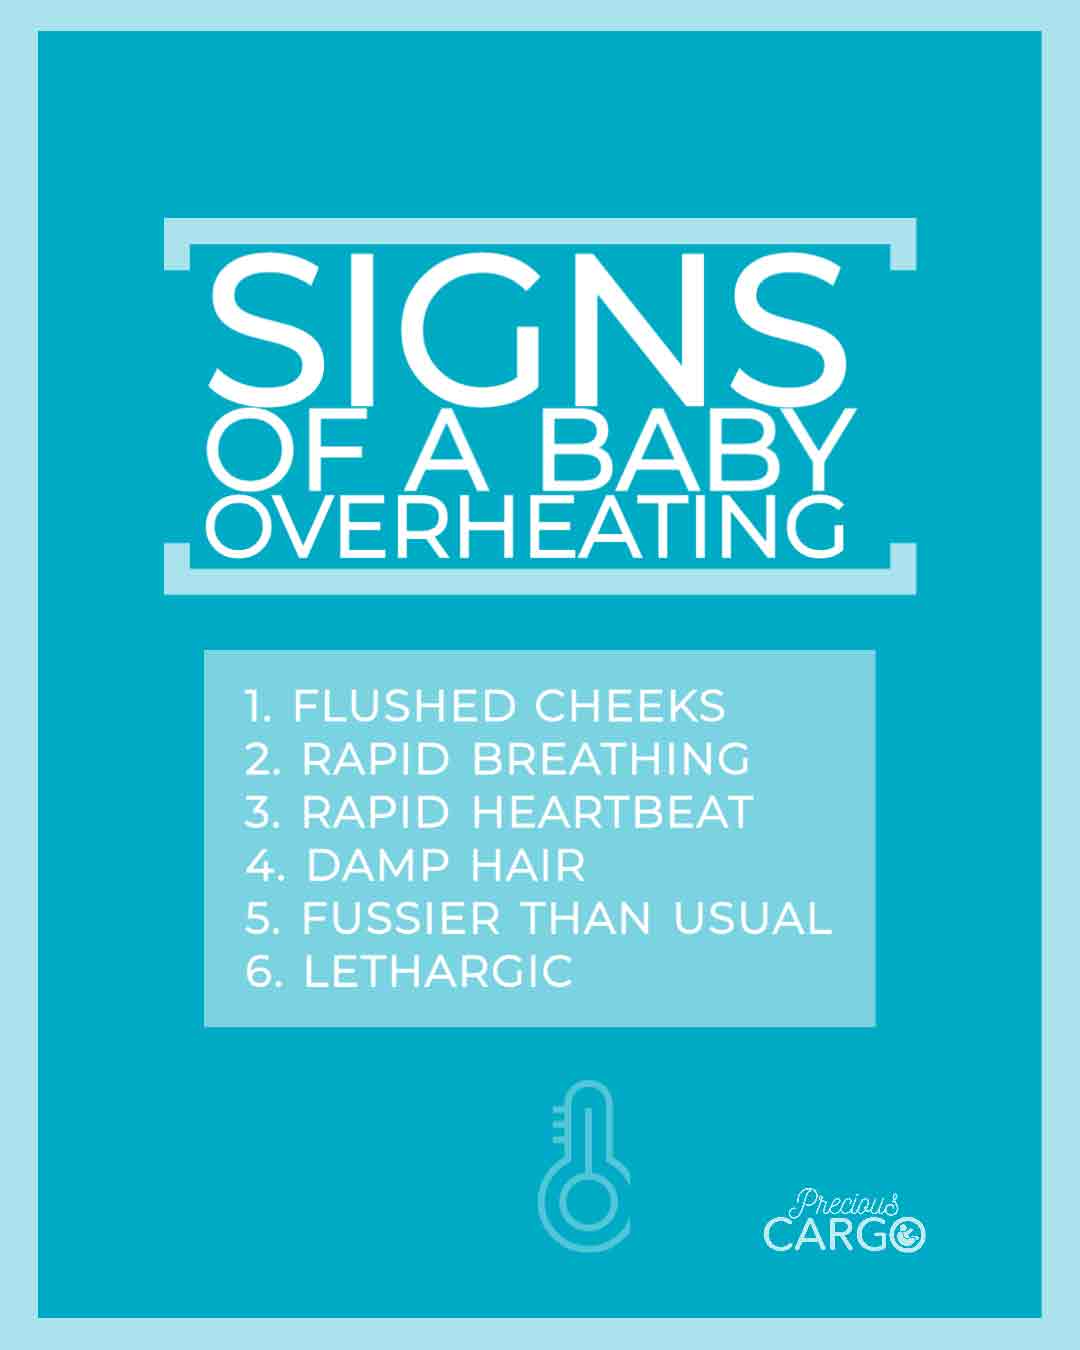 signs of baby overheating